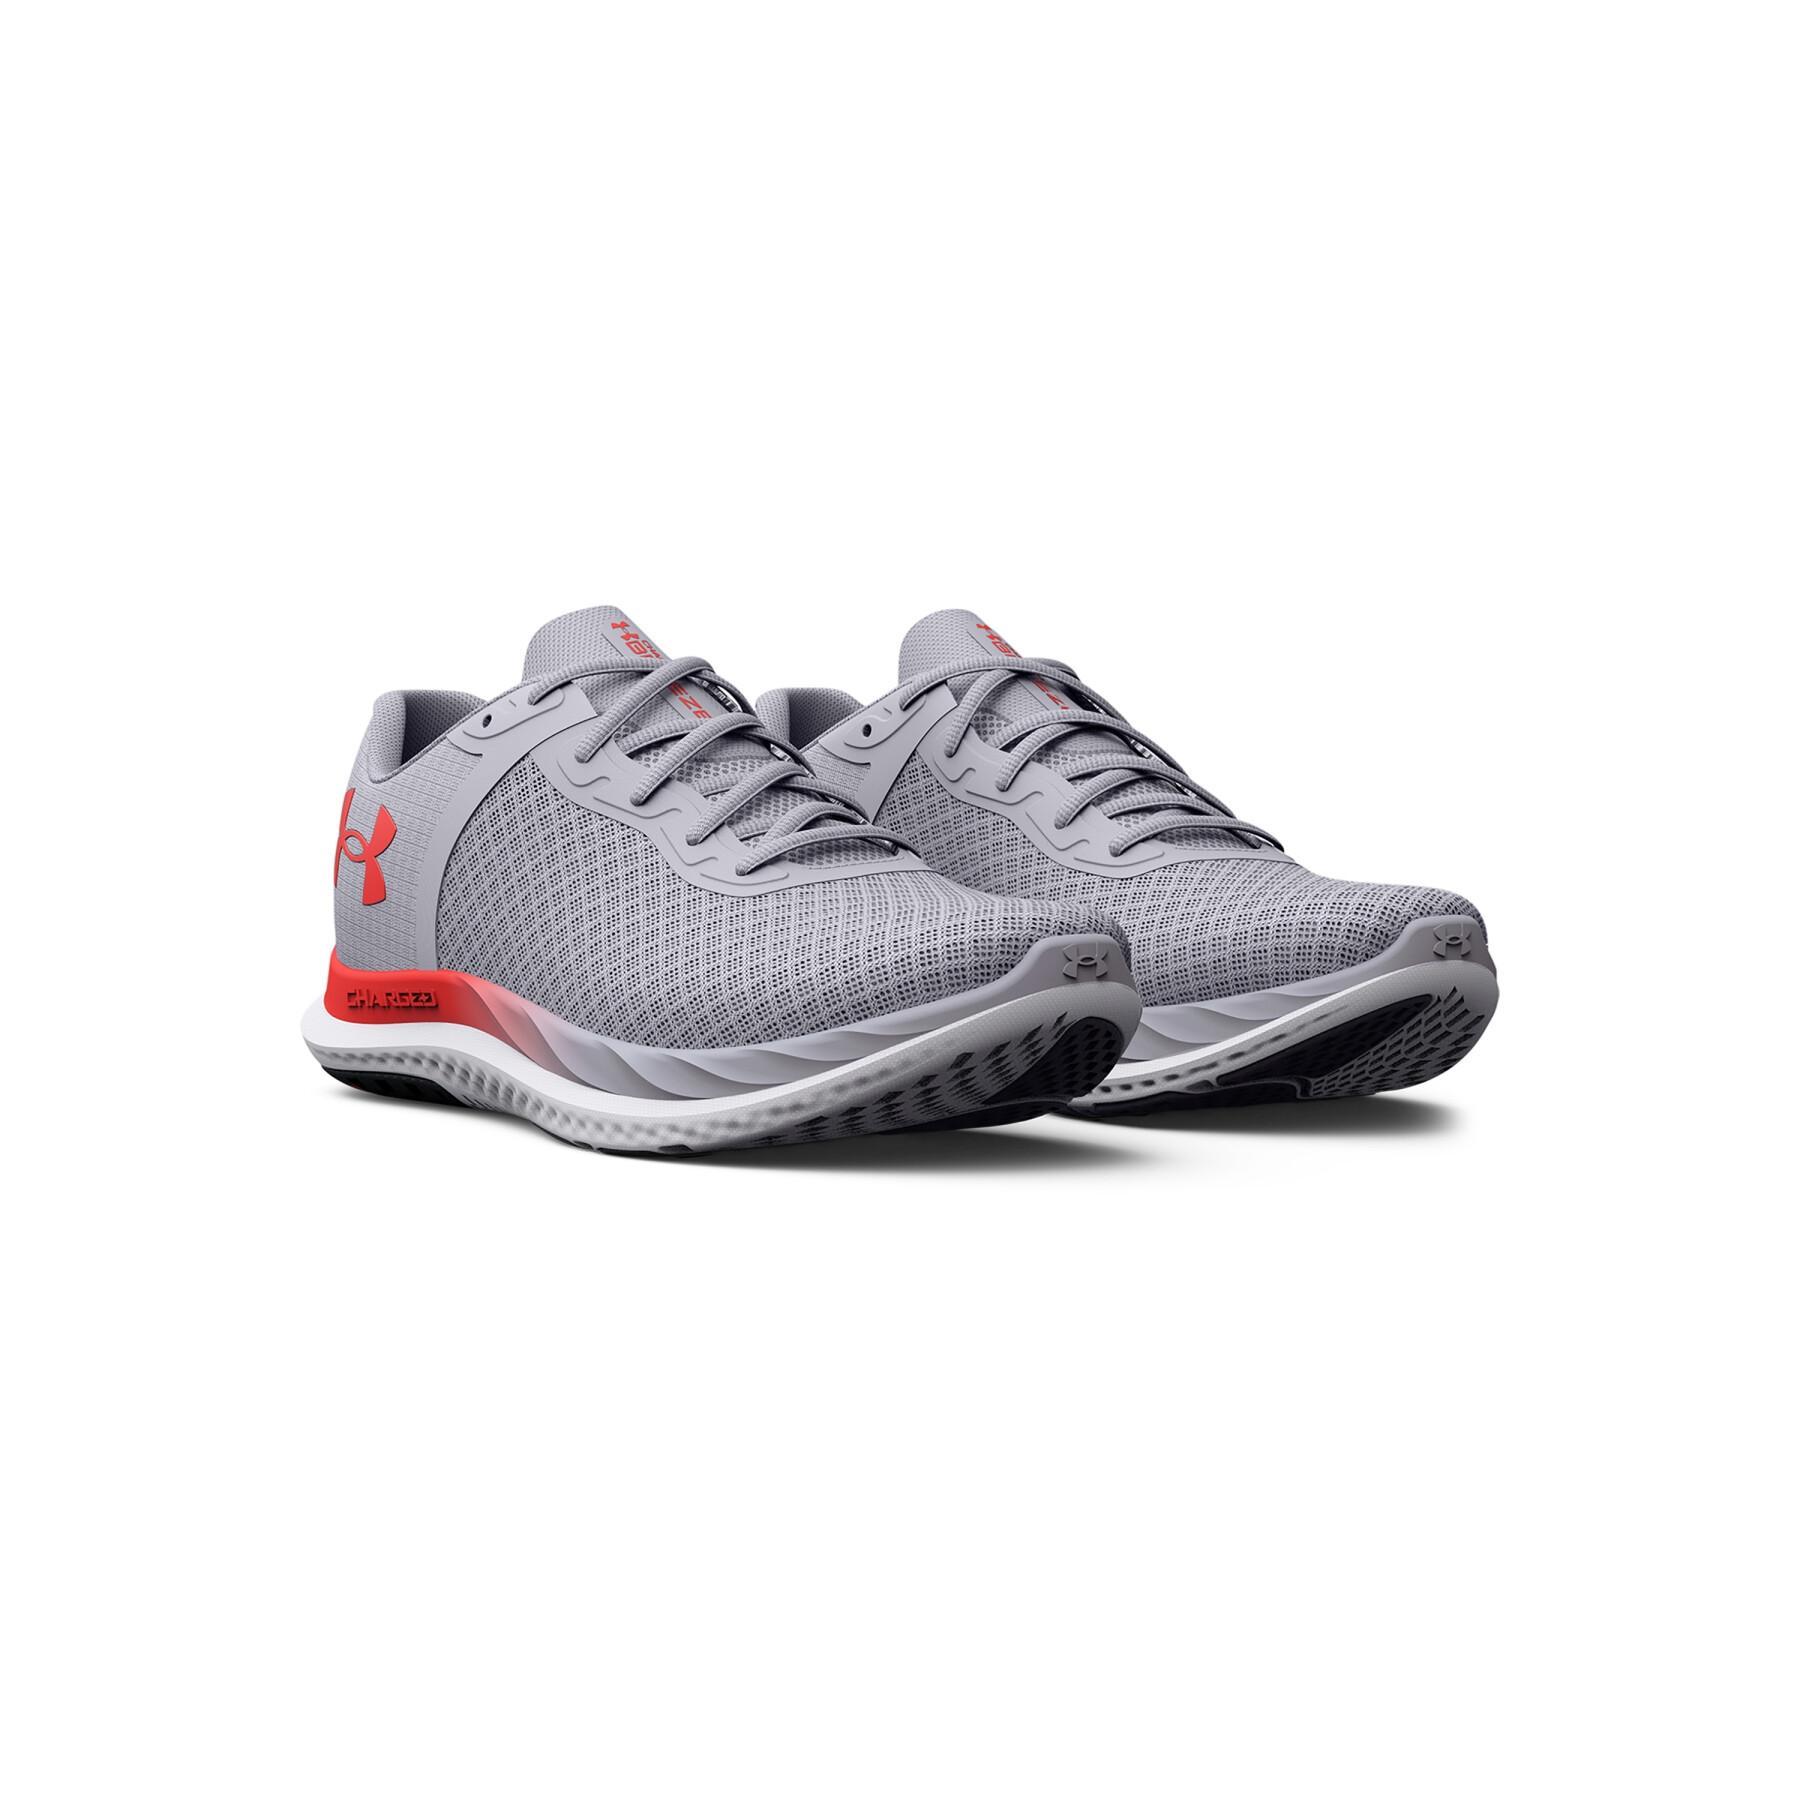 Loopschoenen Under Armour Charged breeze